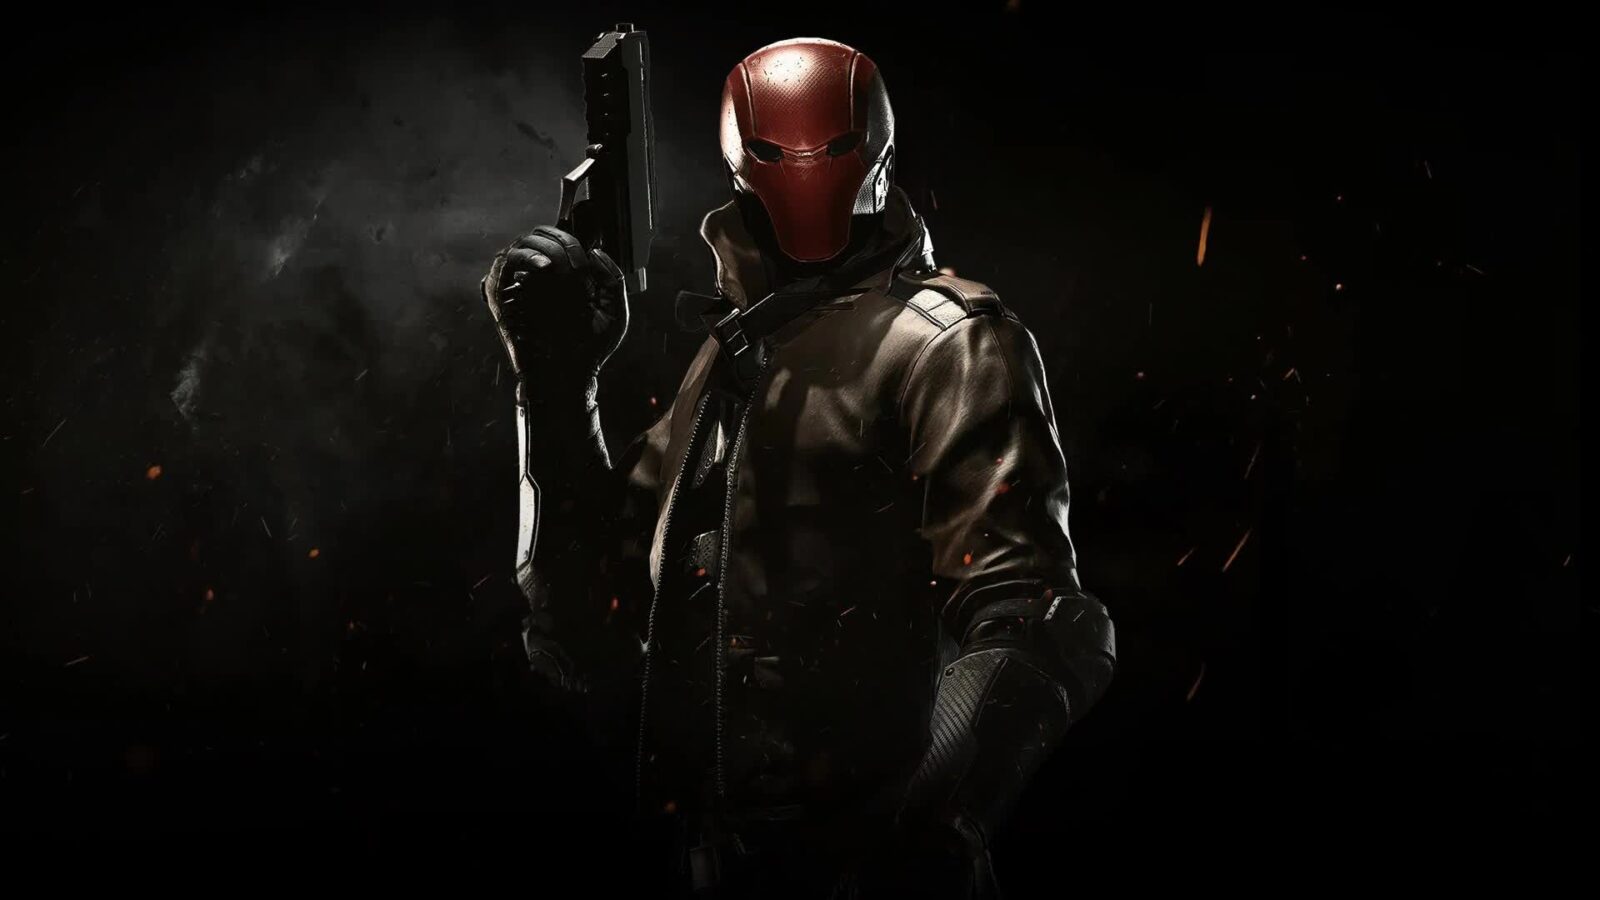 LiveWallpapers4Free.com | Red Hood Injustice 2 - Free Live Wallpaper